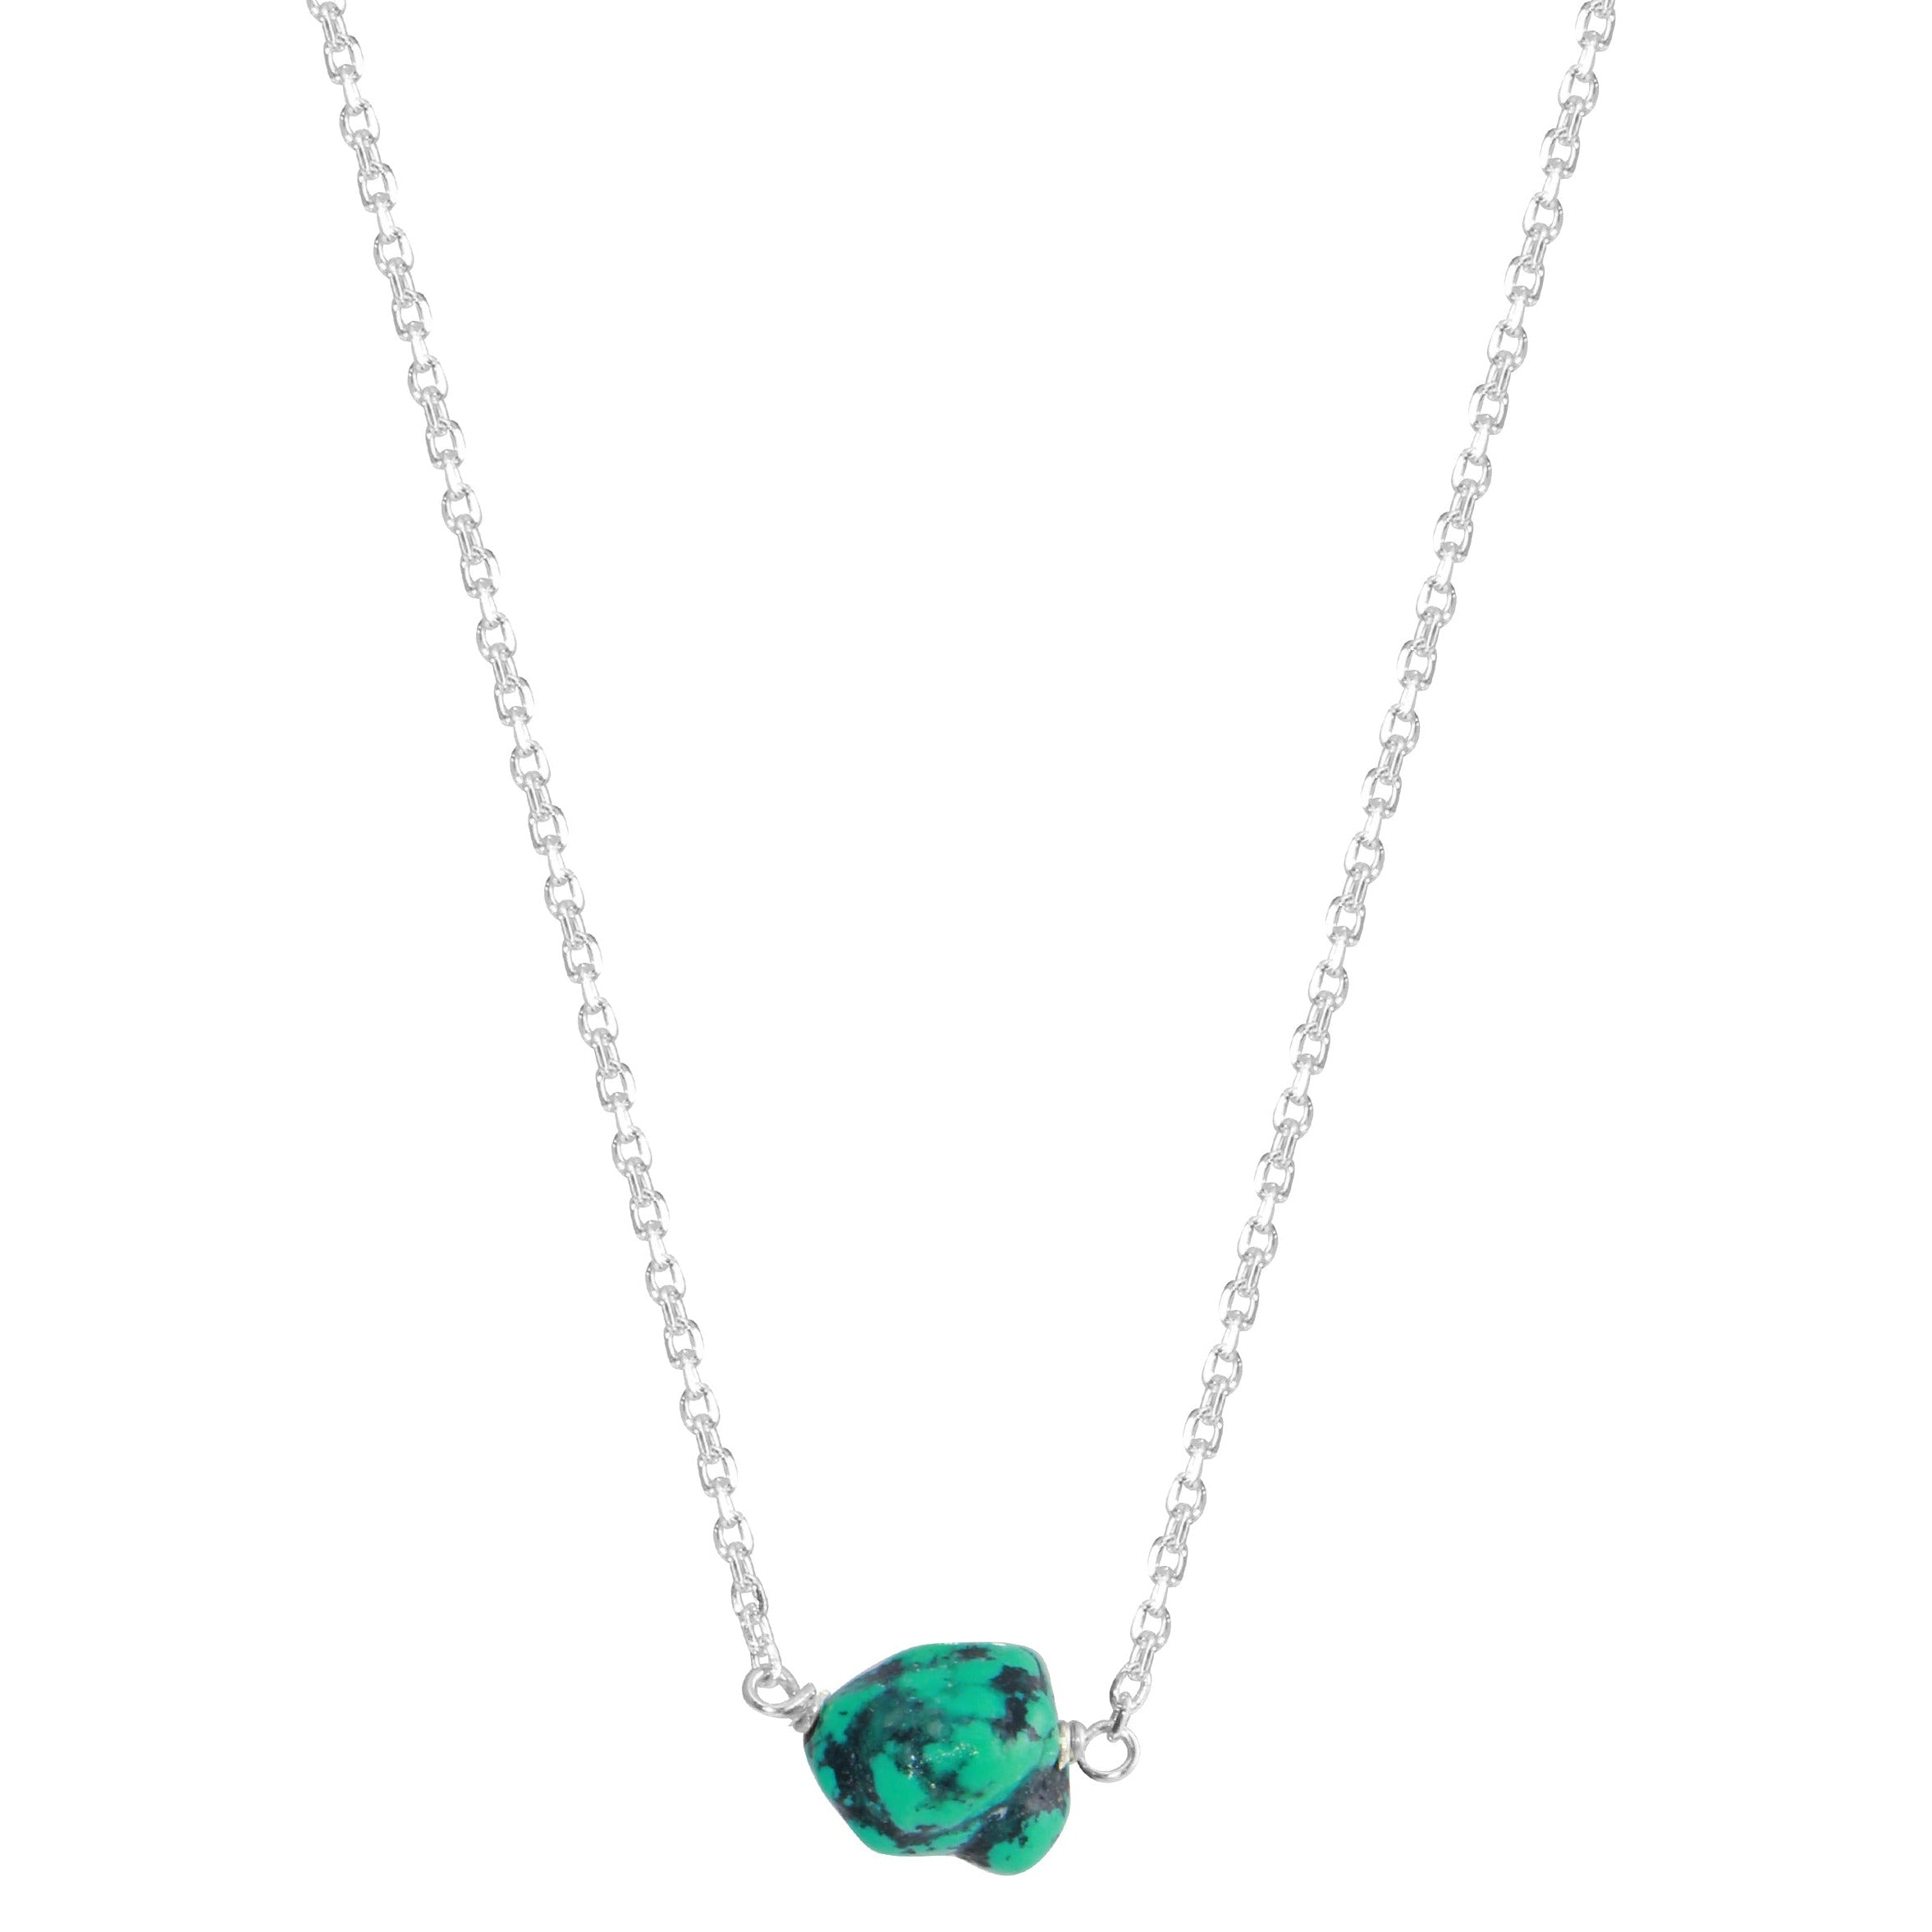 Turquoise Nugget Necklace - sterling silver or gold filled | Little Rock Collection necklace Amanda K Lockrow